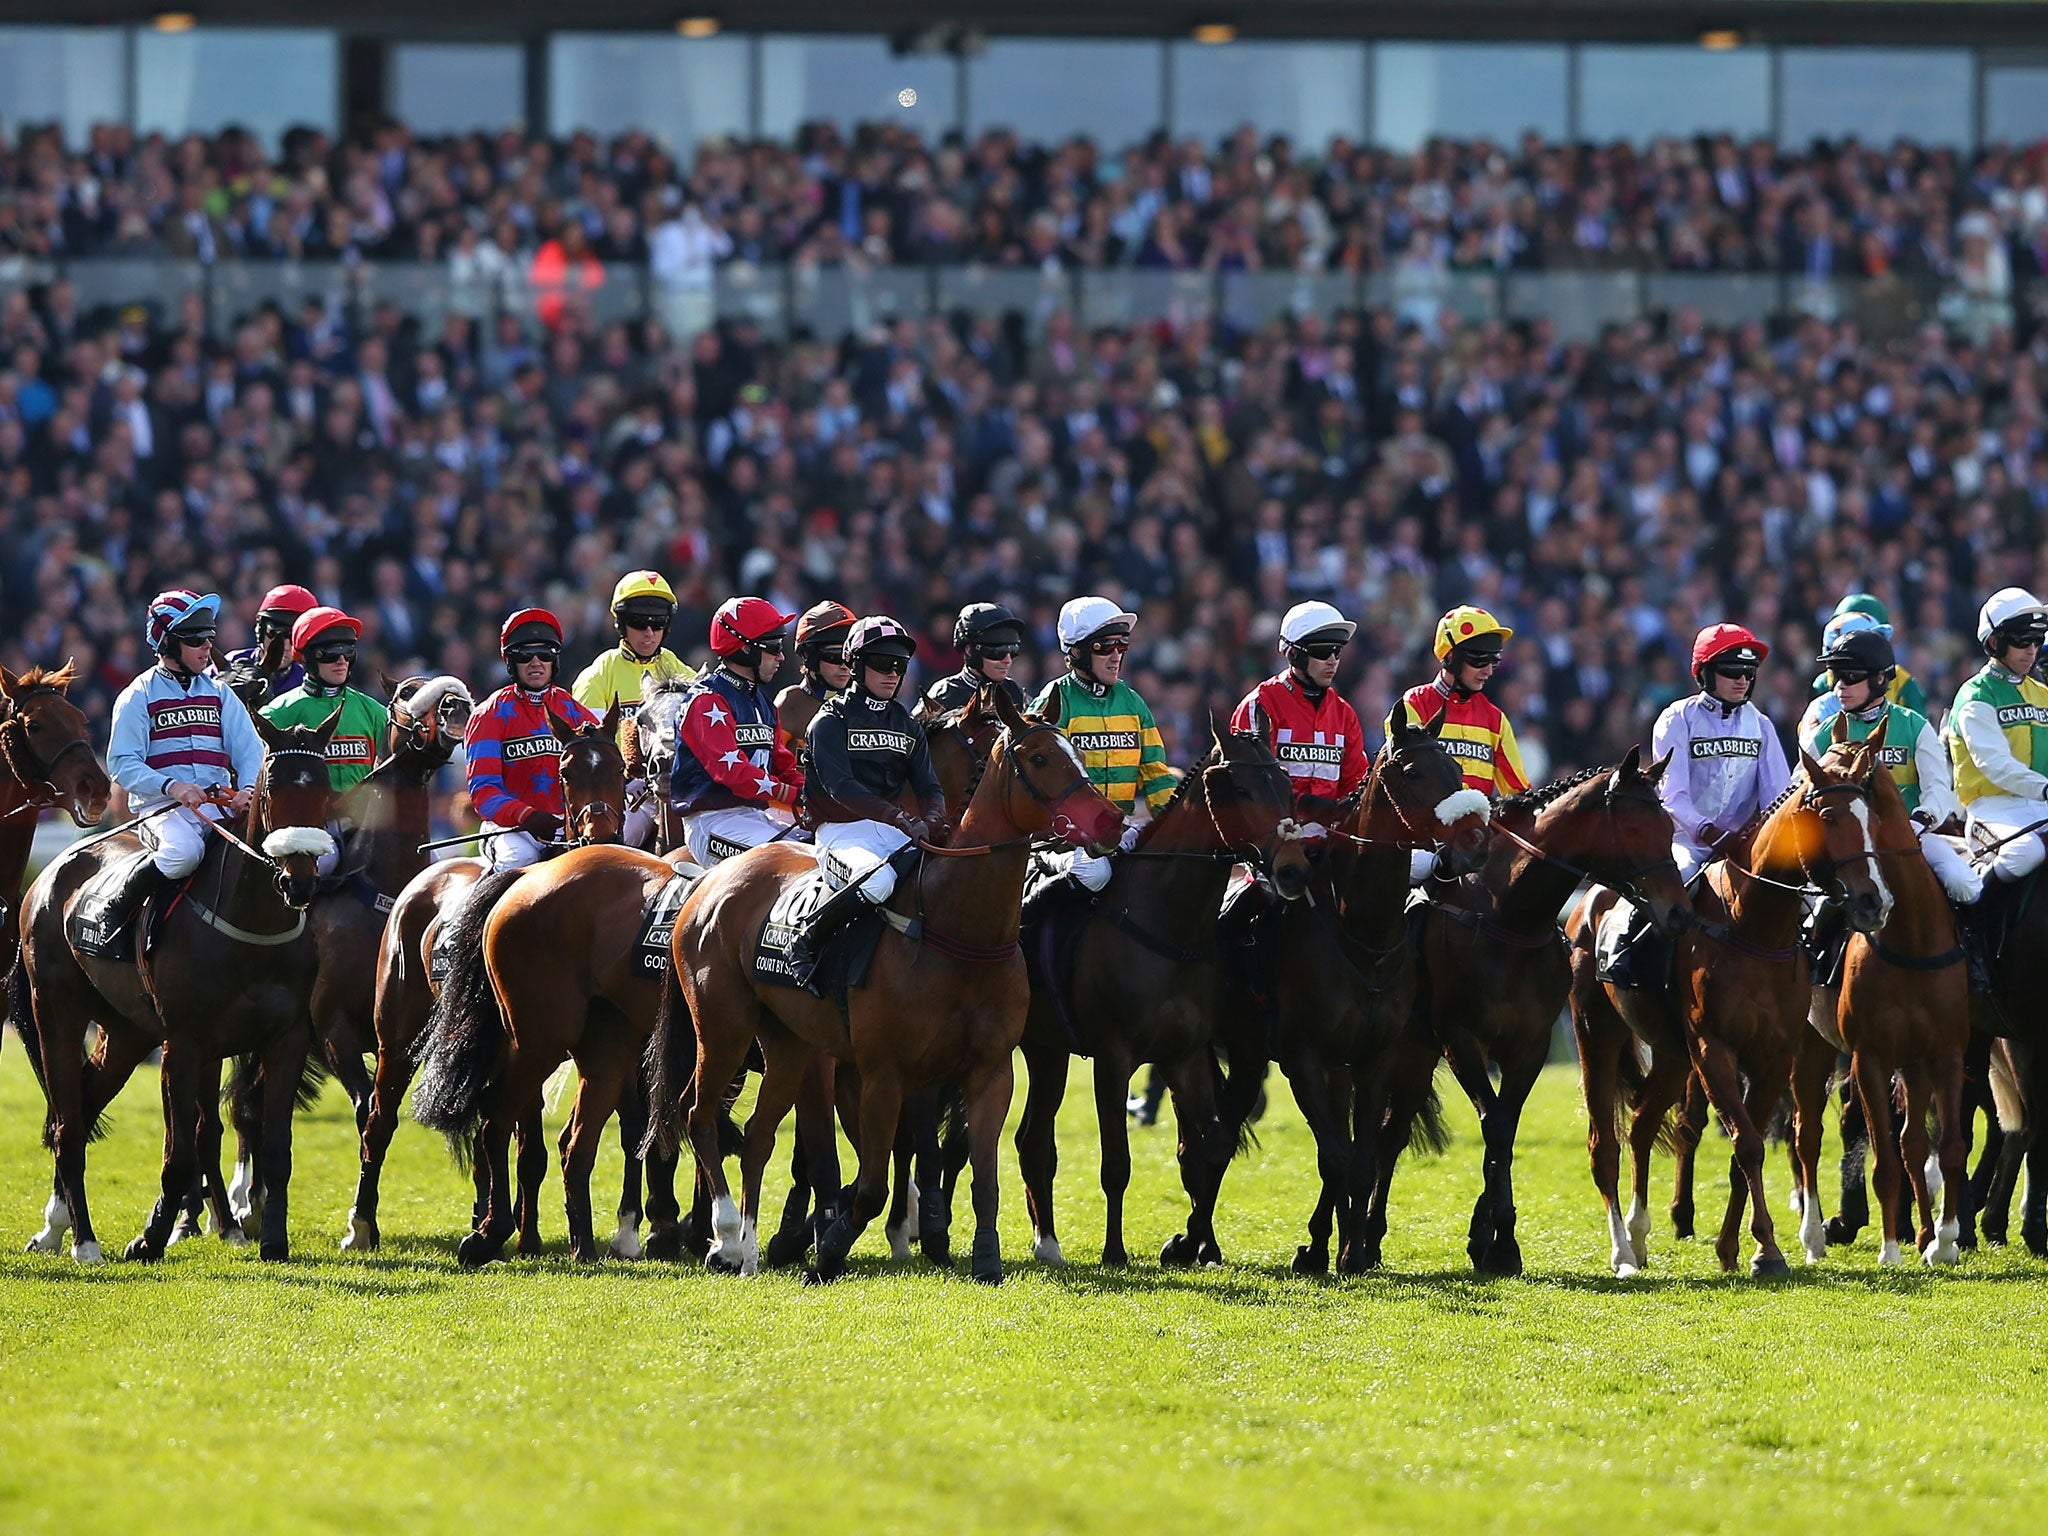 Horses line-up for the start of the Grand National